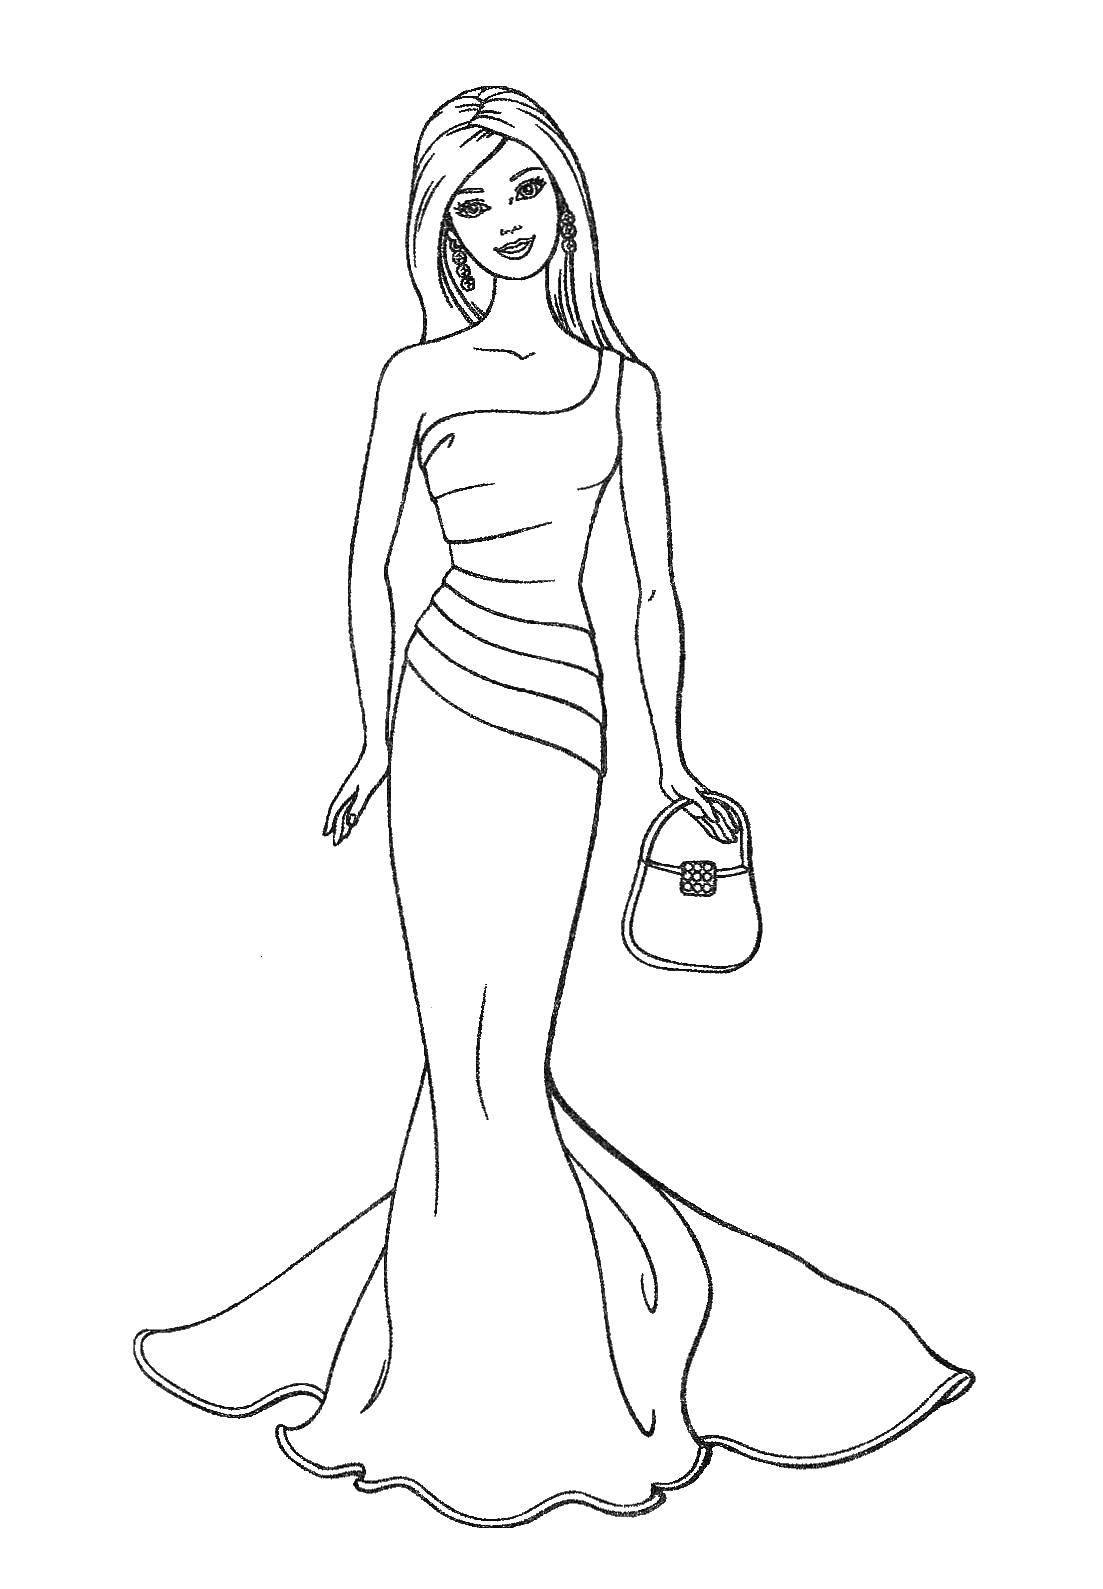 Coloring Barbie long dress. Category Barbie . Tags:  Barbie , girl, doll.